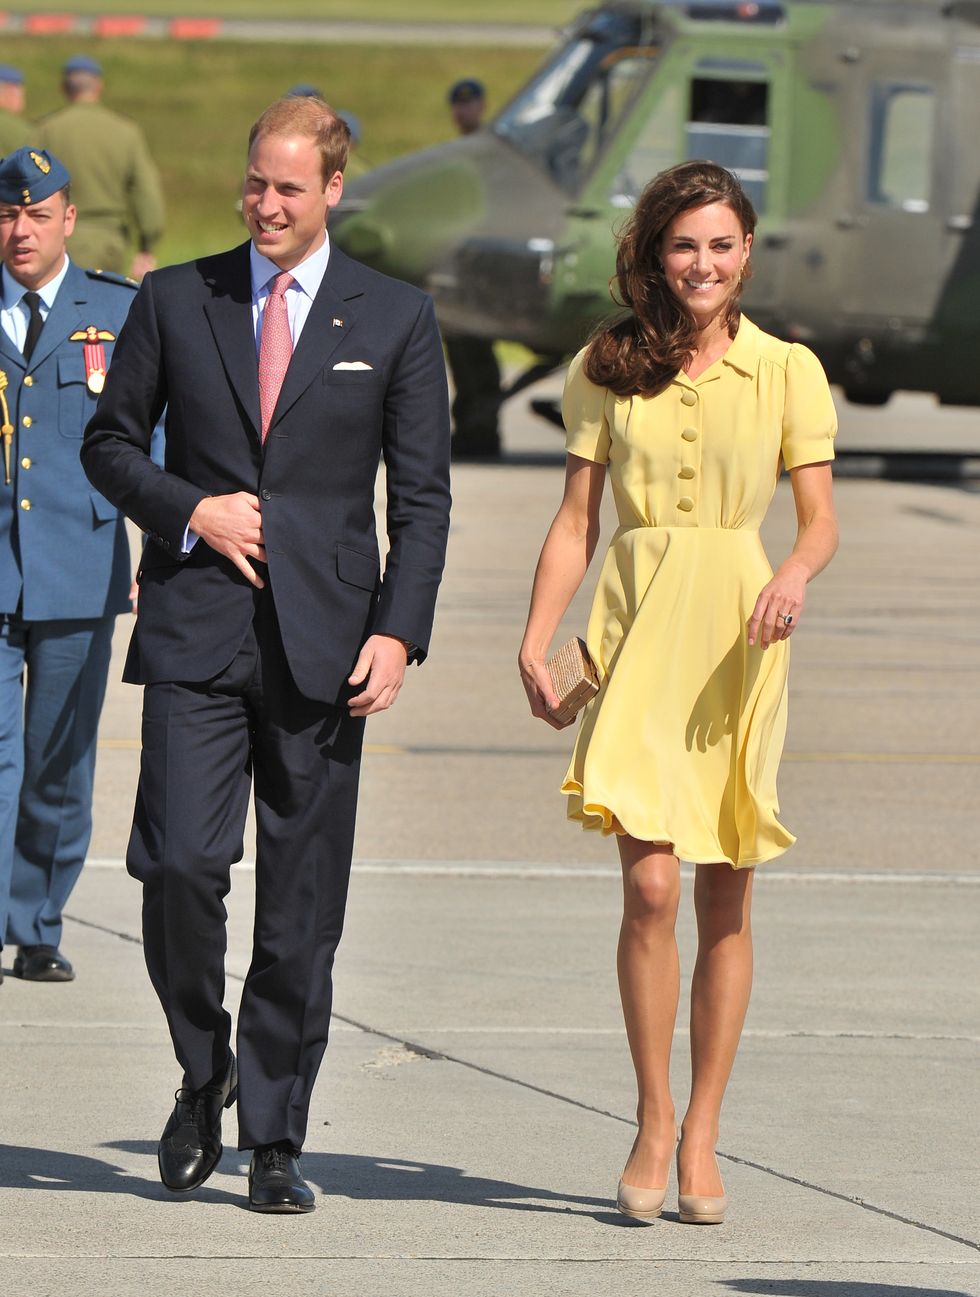 The Duke And Duchess Of Cambridge North American Royal Visit - Day 8